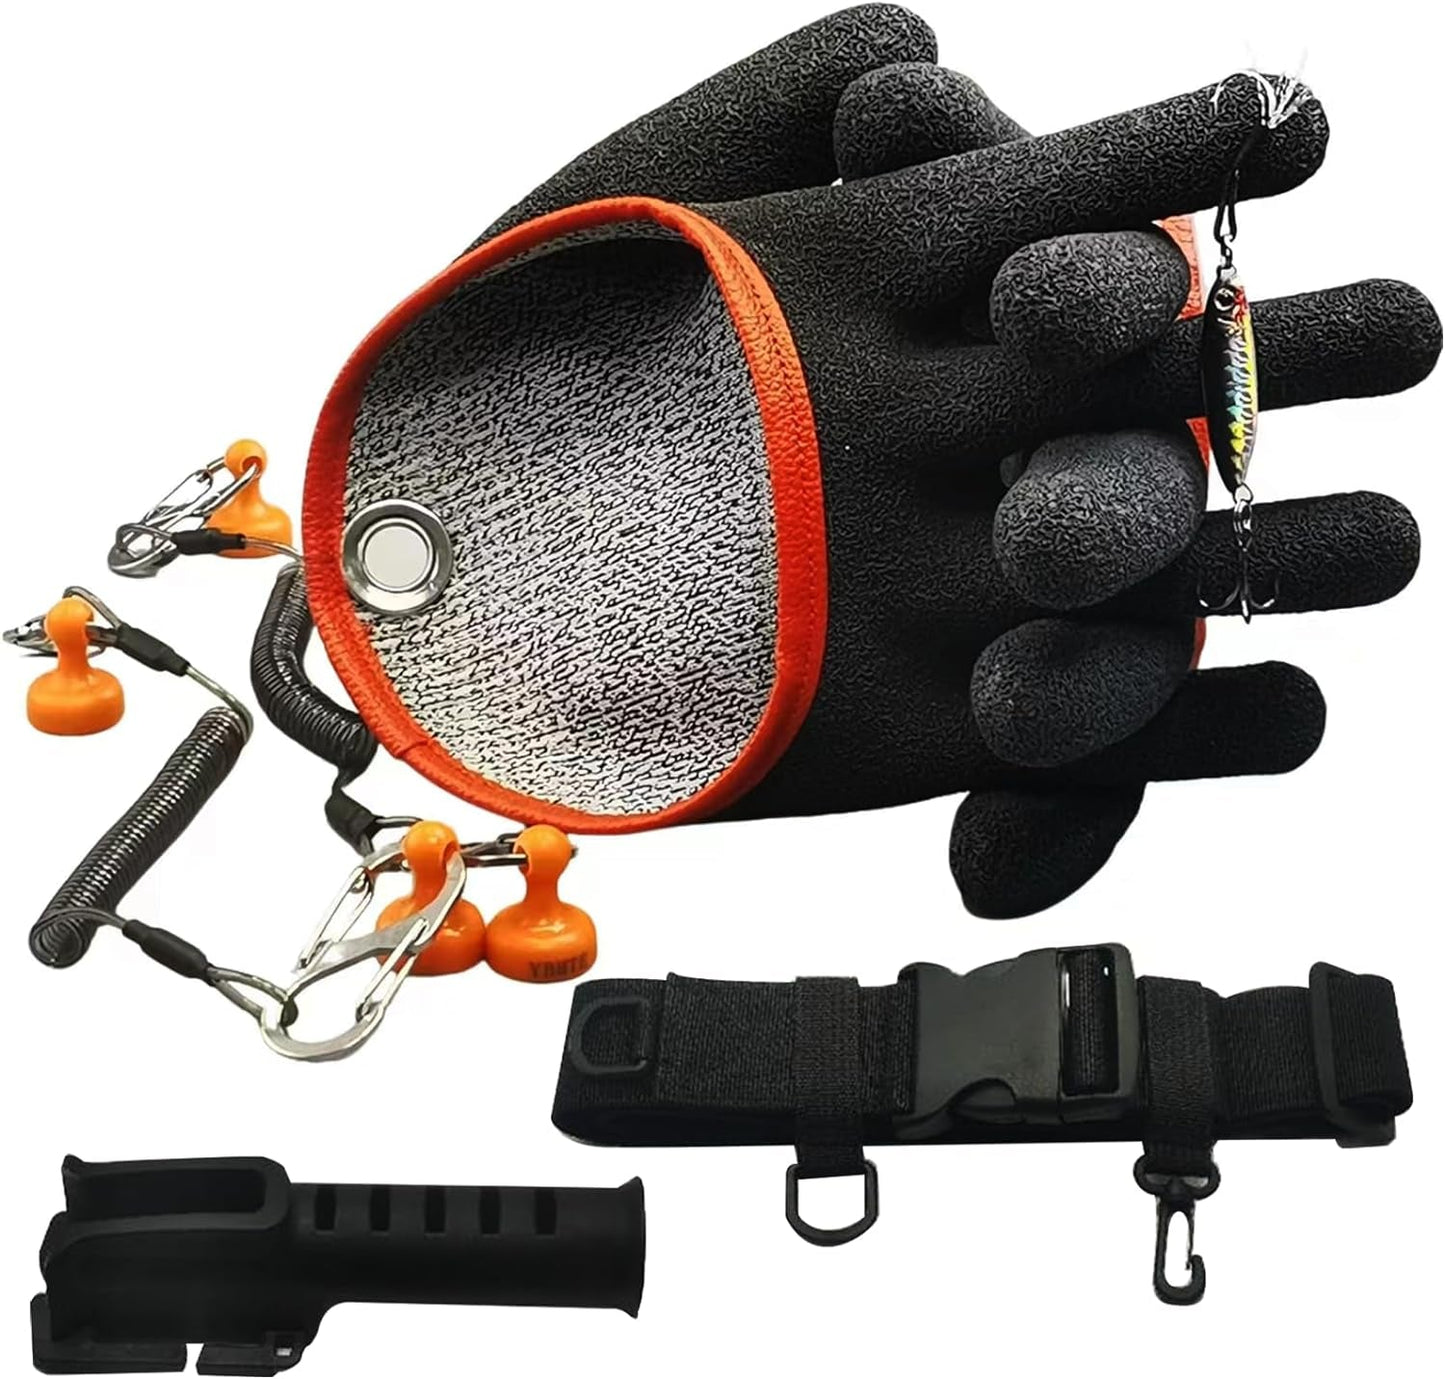 Fishing Catching Gloves Non-Slip Fisherman Protect Hand, Fishing Rod Holster, Fly Fishing Lanyard with Magnet Release,304 S Carabiner Clip, Fishing Accessories Gifts for Fisherman